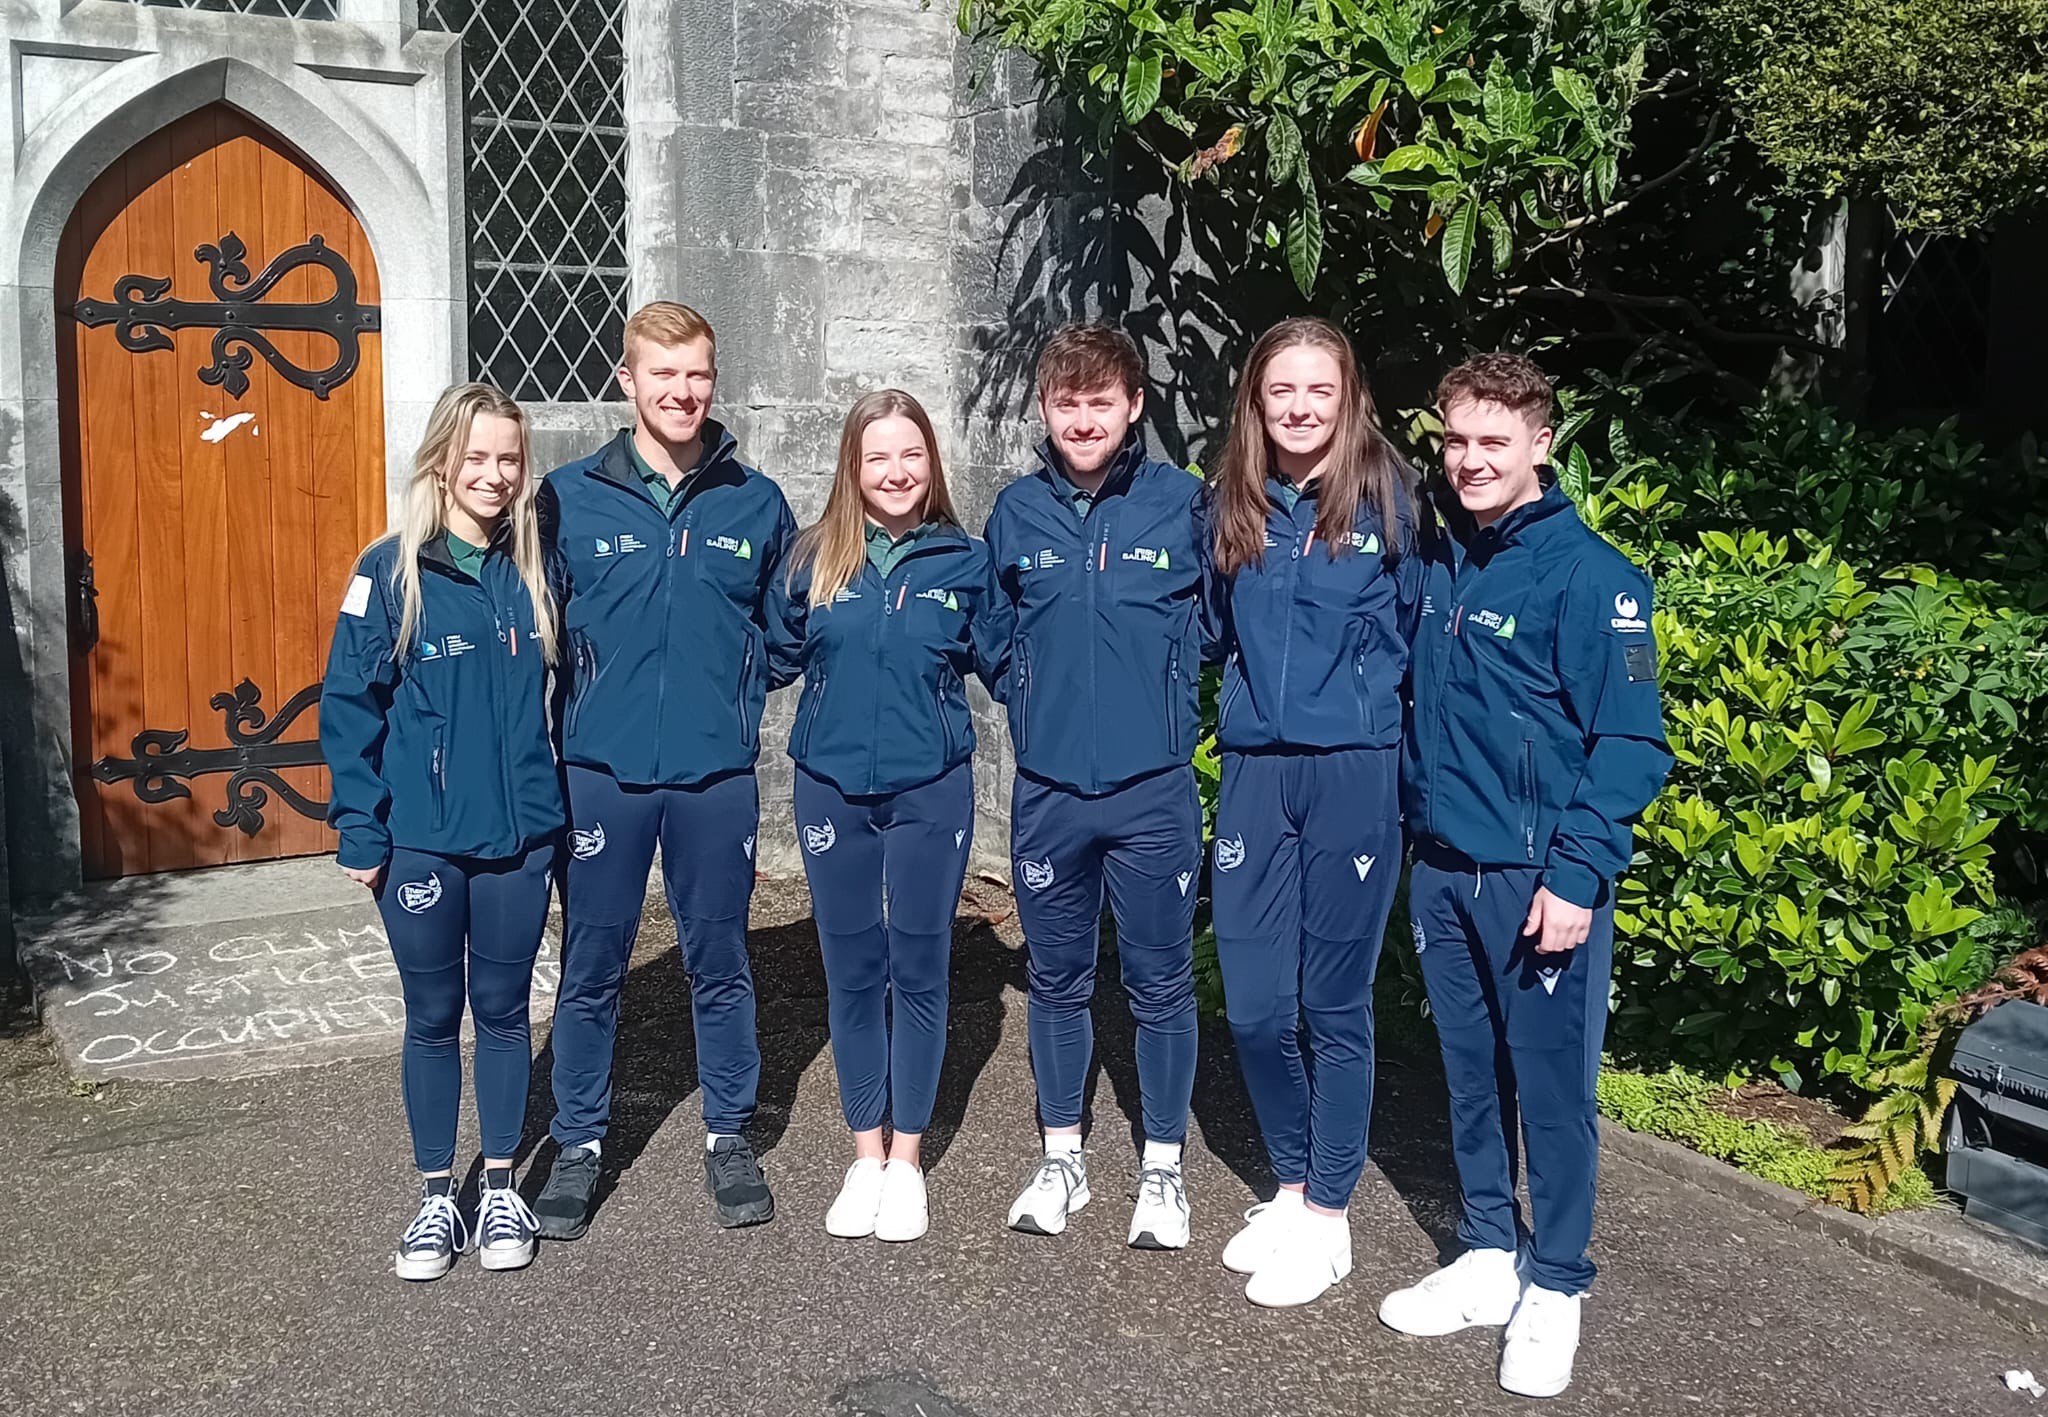 UCC Sailing Club selected to represent the Irish 3rd level institutions at the FISU World Sailing Championships .